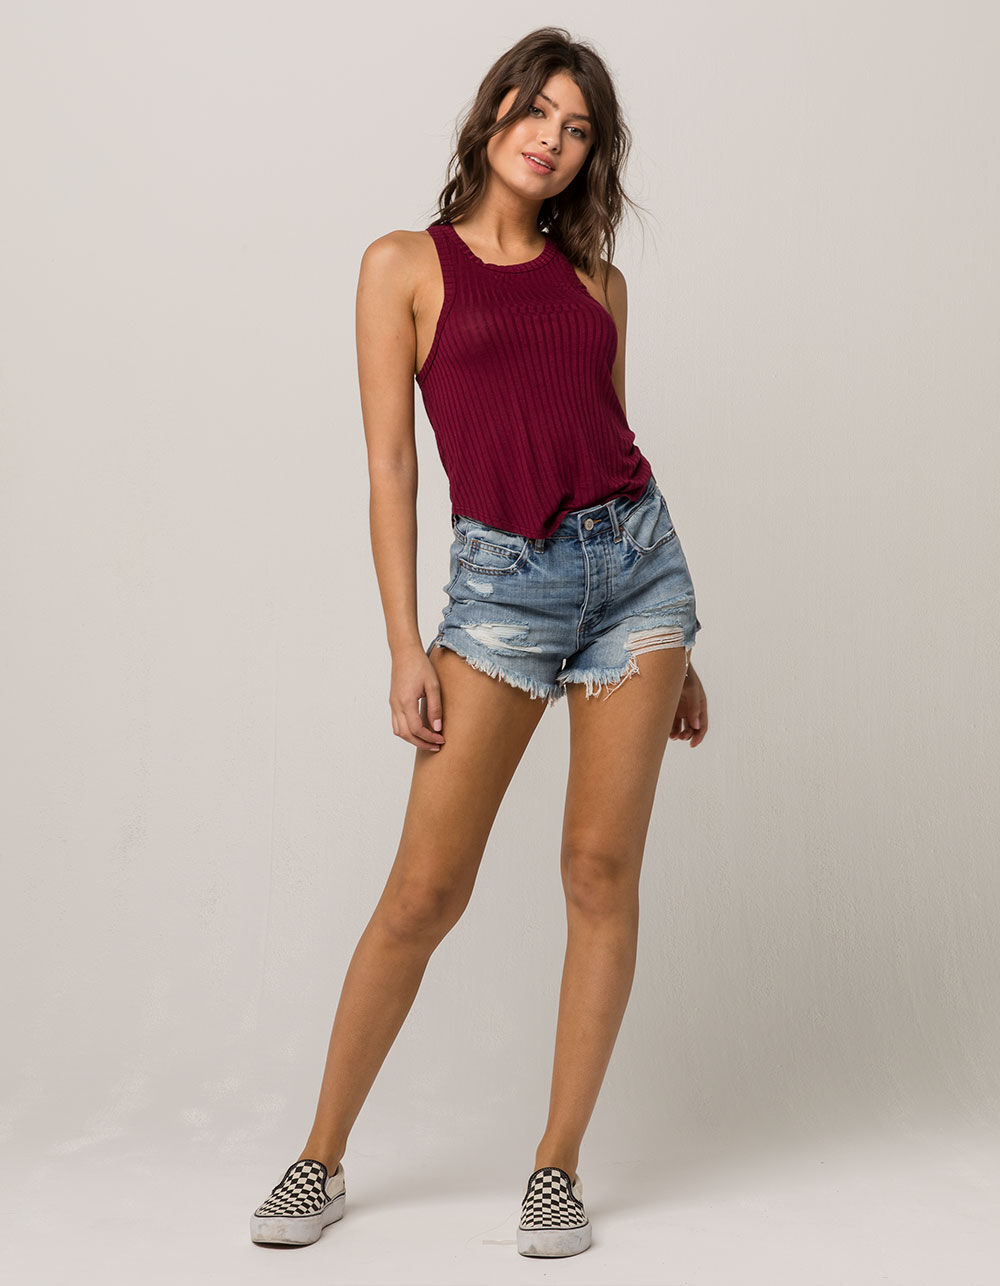 BOZZOLO Rib High Neck Wine Womens Tank Top image number 3